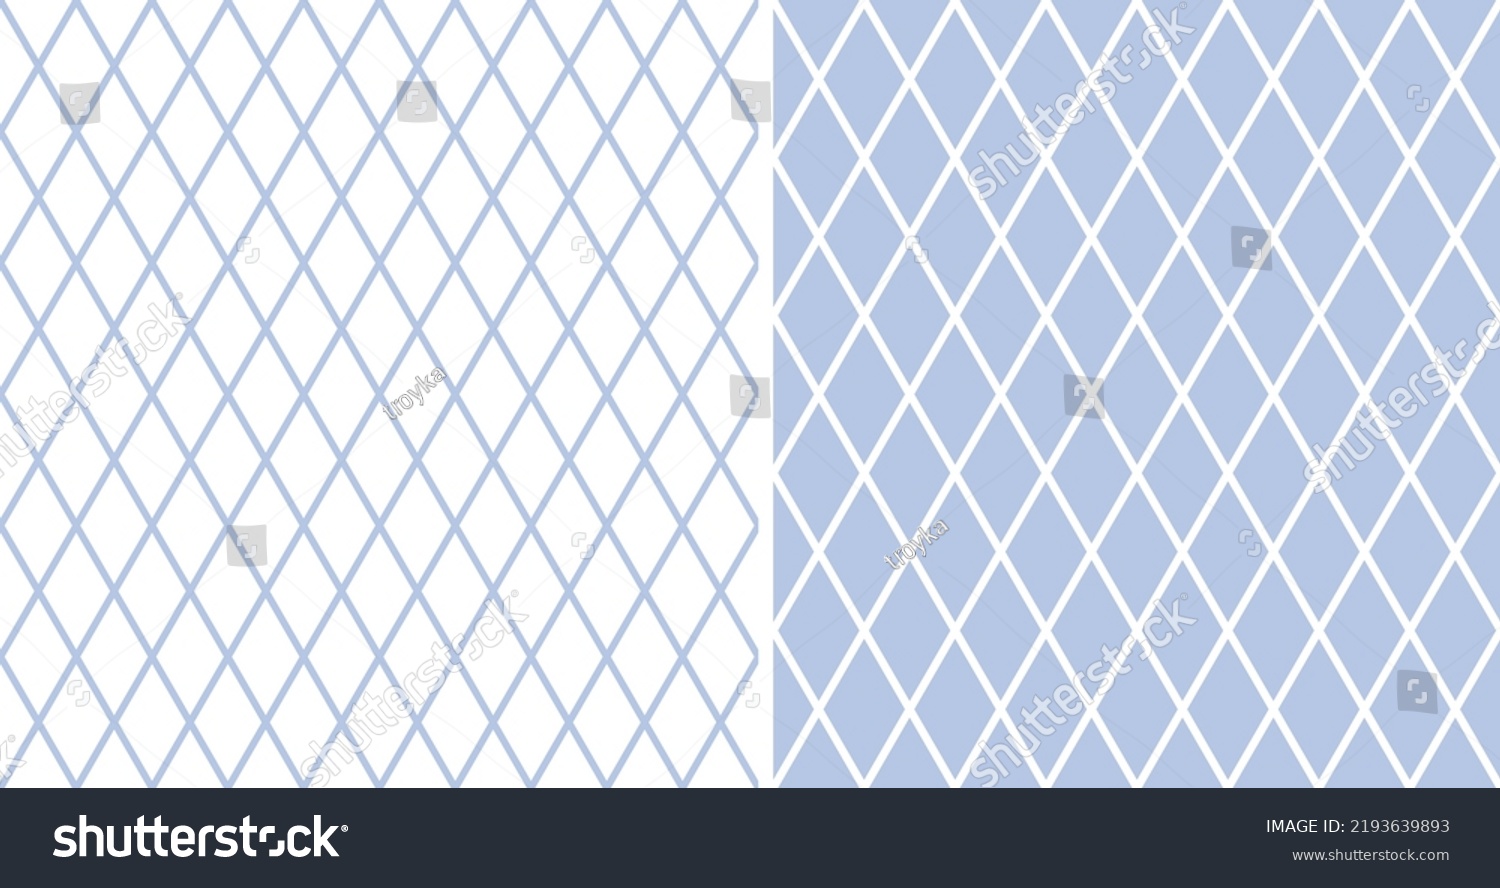 Abstract Seamless Geometric Diamonds Patterns. Blue and White Textures. Vector Art. #2193639893